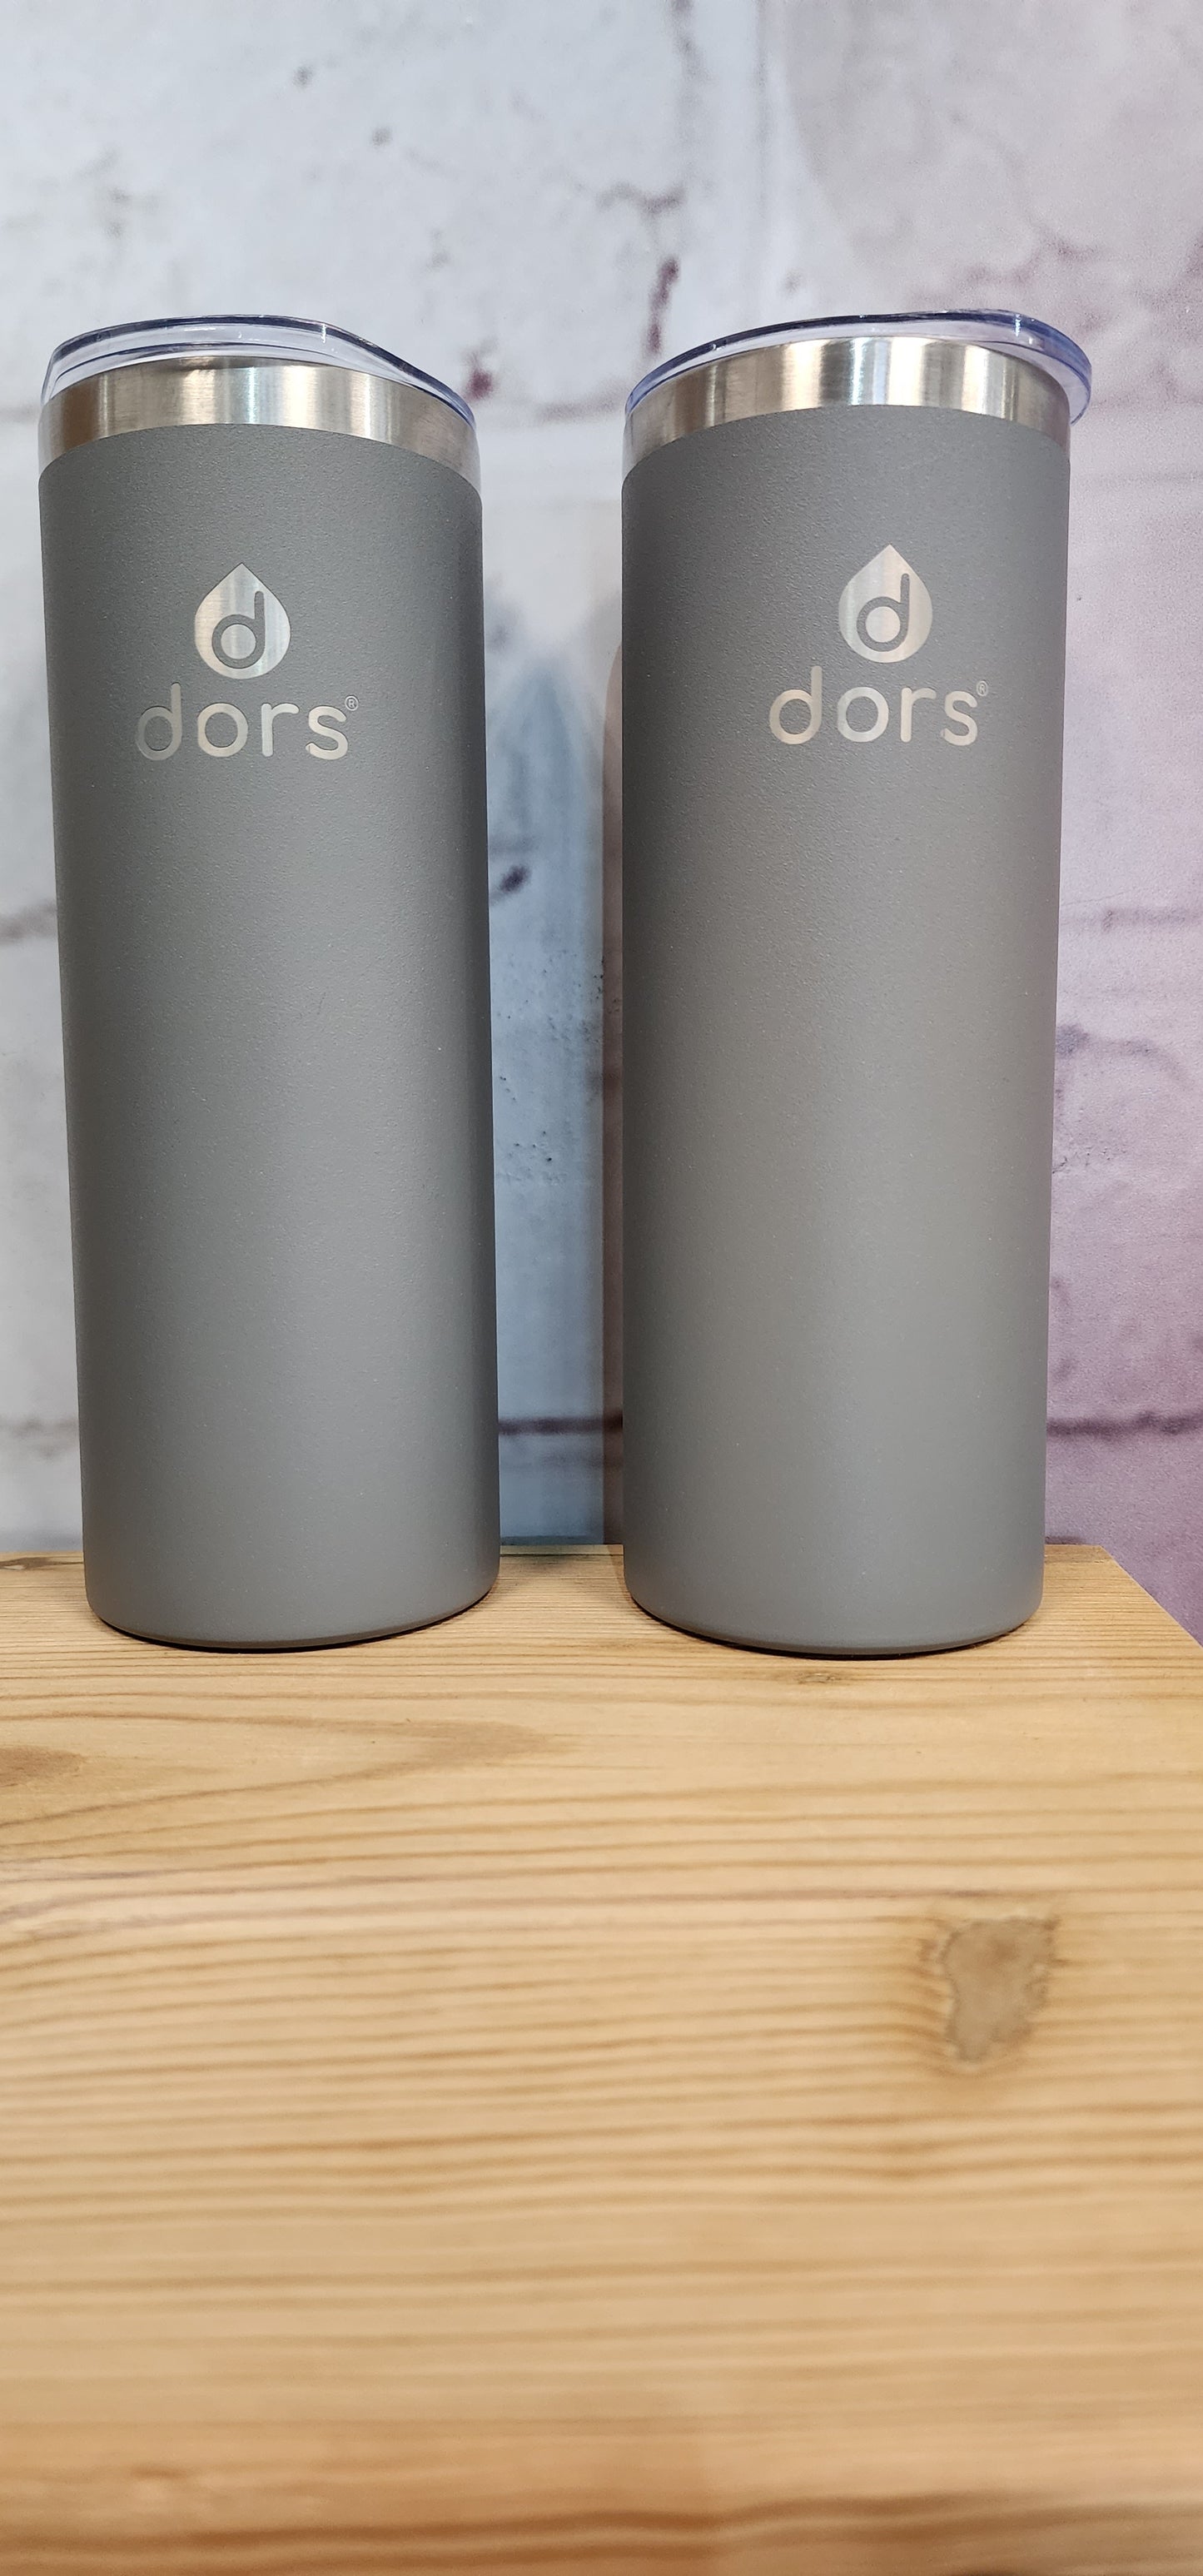 dors hot and cold, double wall Tumbler